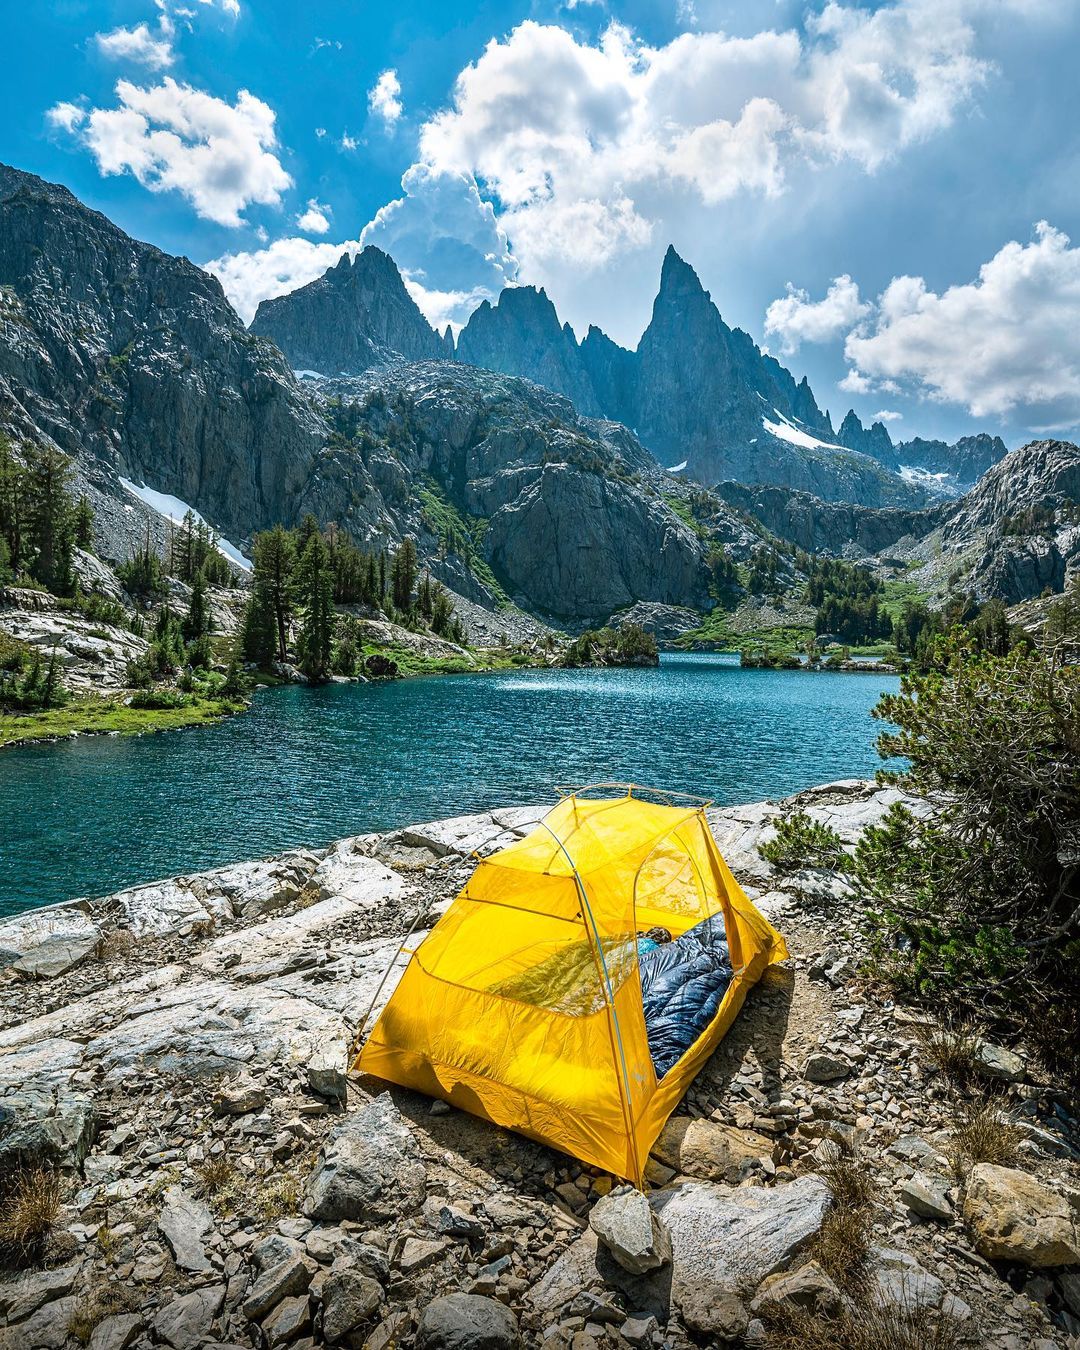 Yellow Tent Next to a River. Photo by Instagram user @v_outdoors